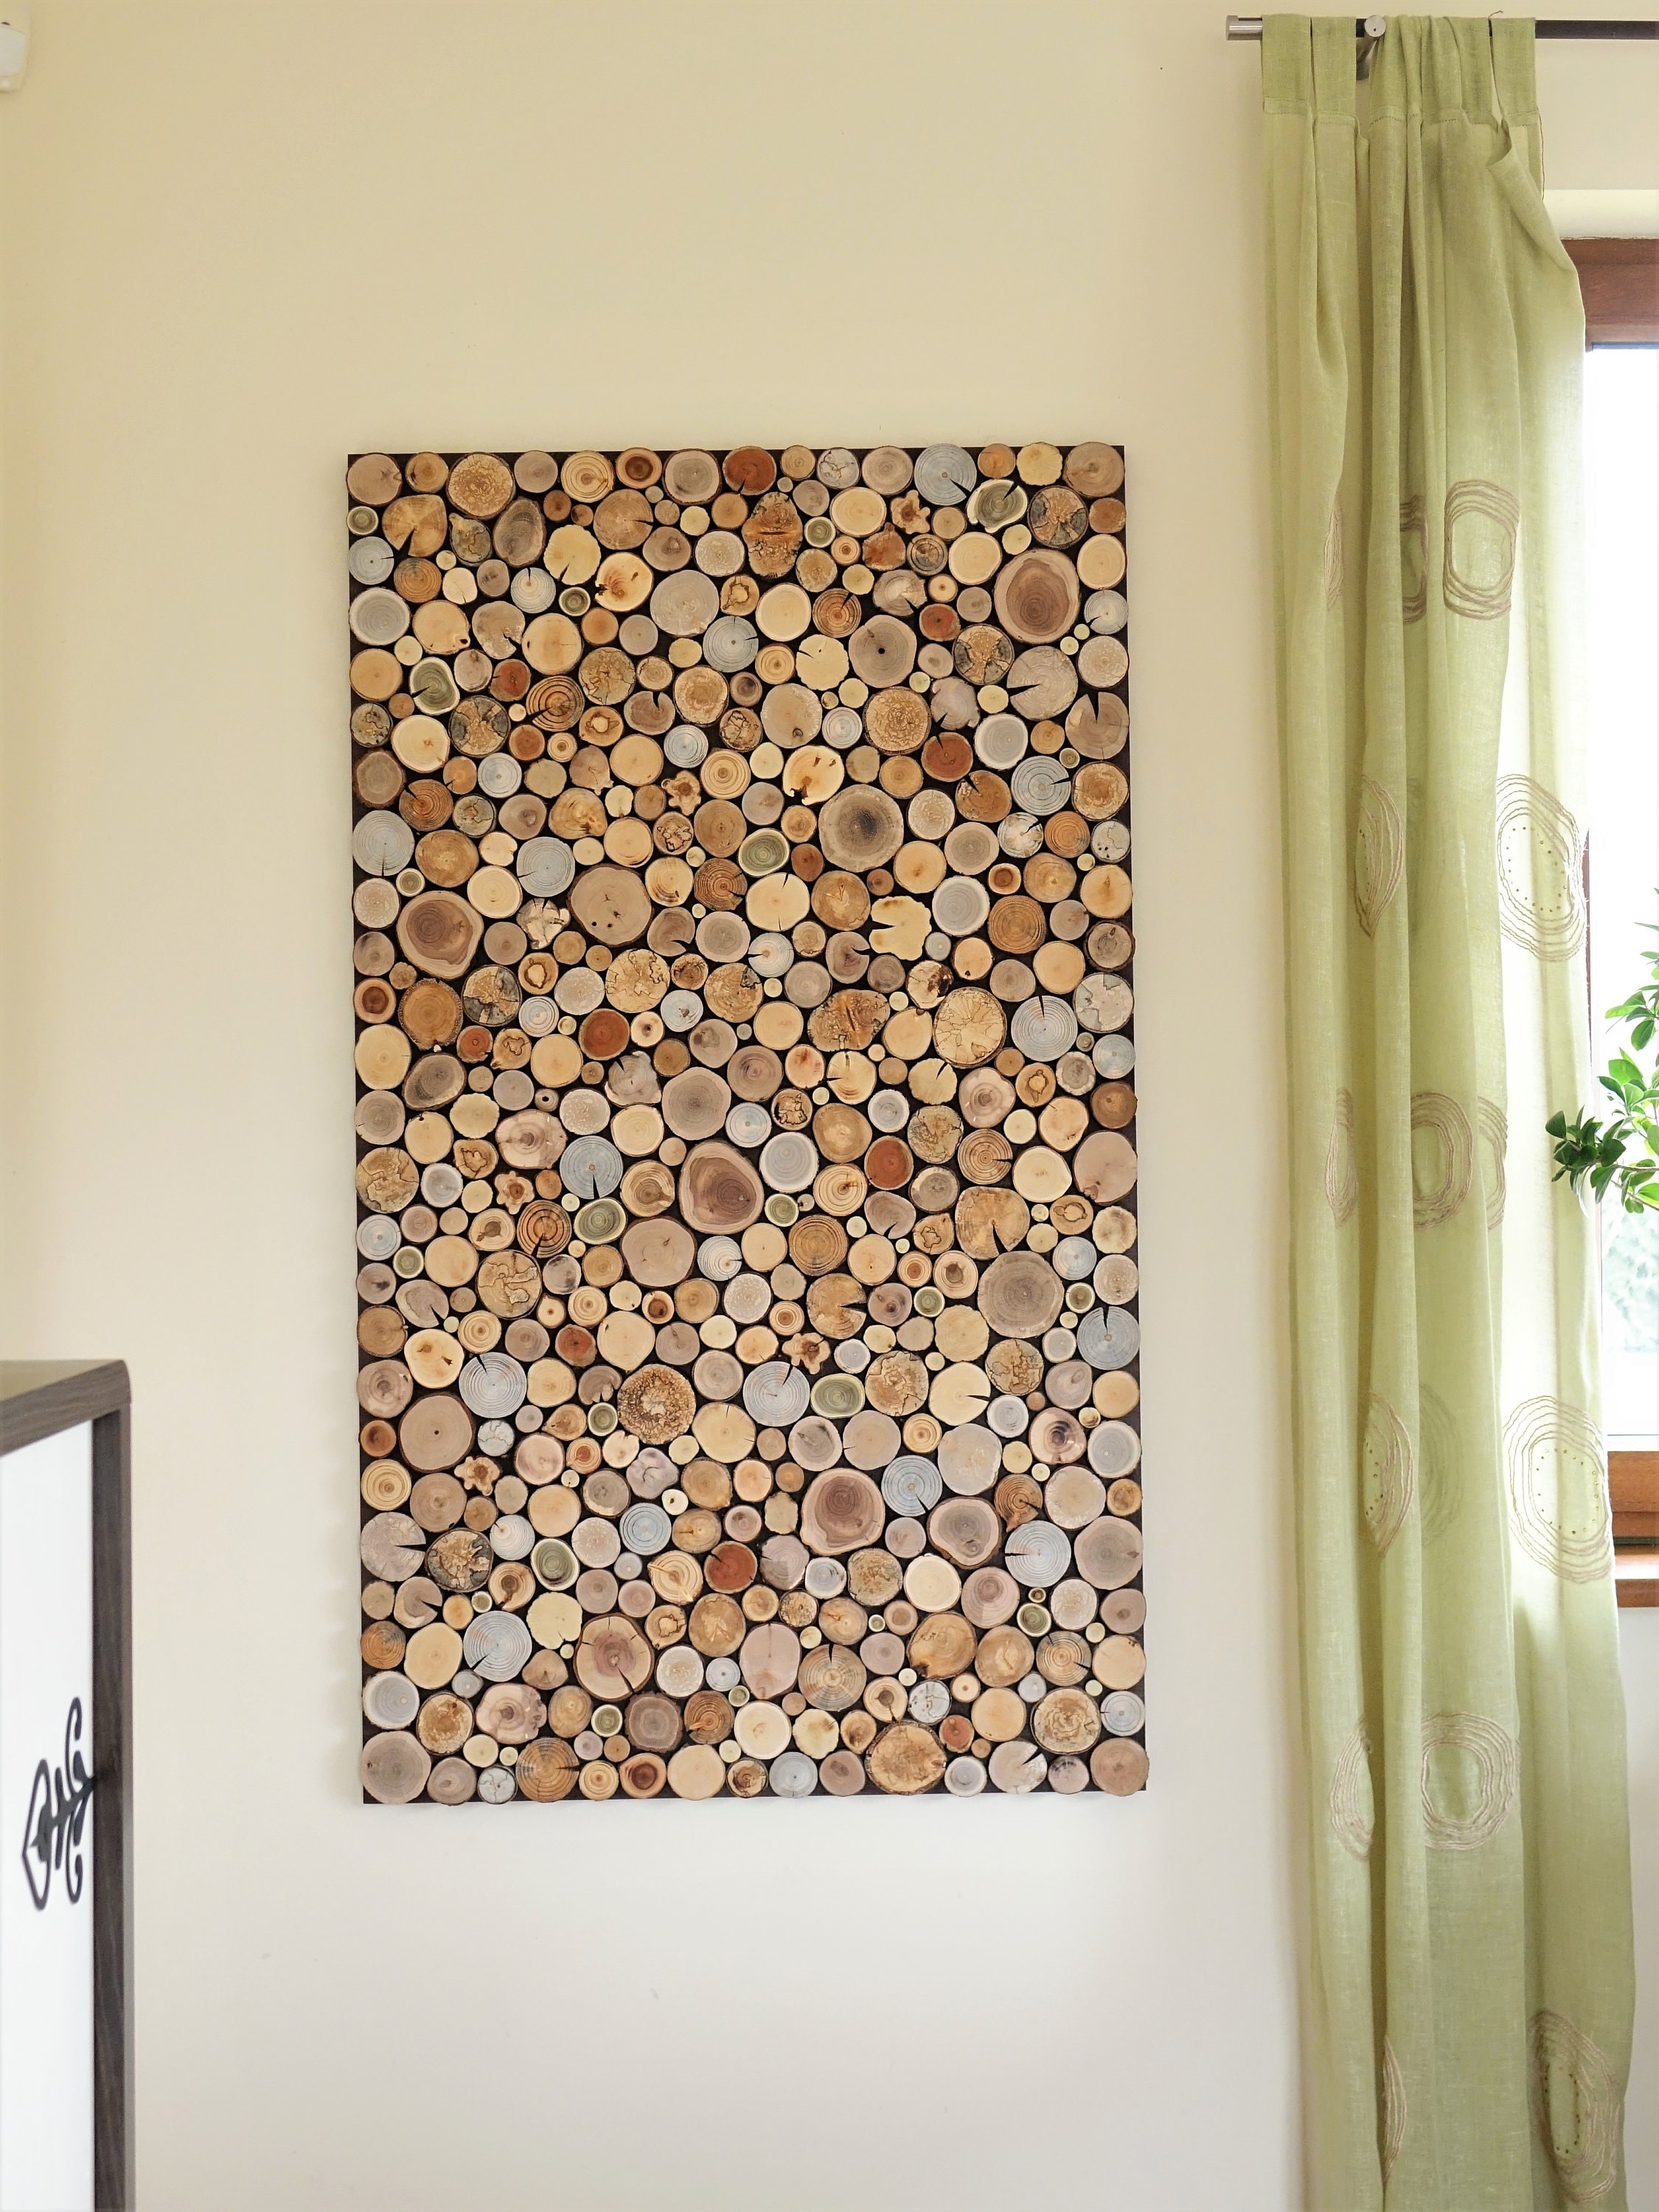 Wood Panel Wall Decor: A Touch Of Nature For Your Home